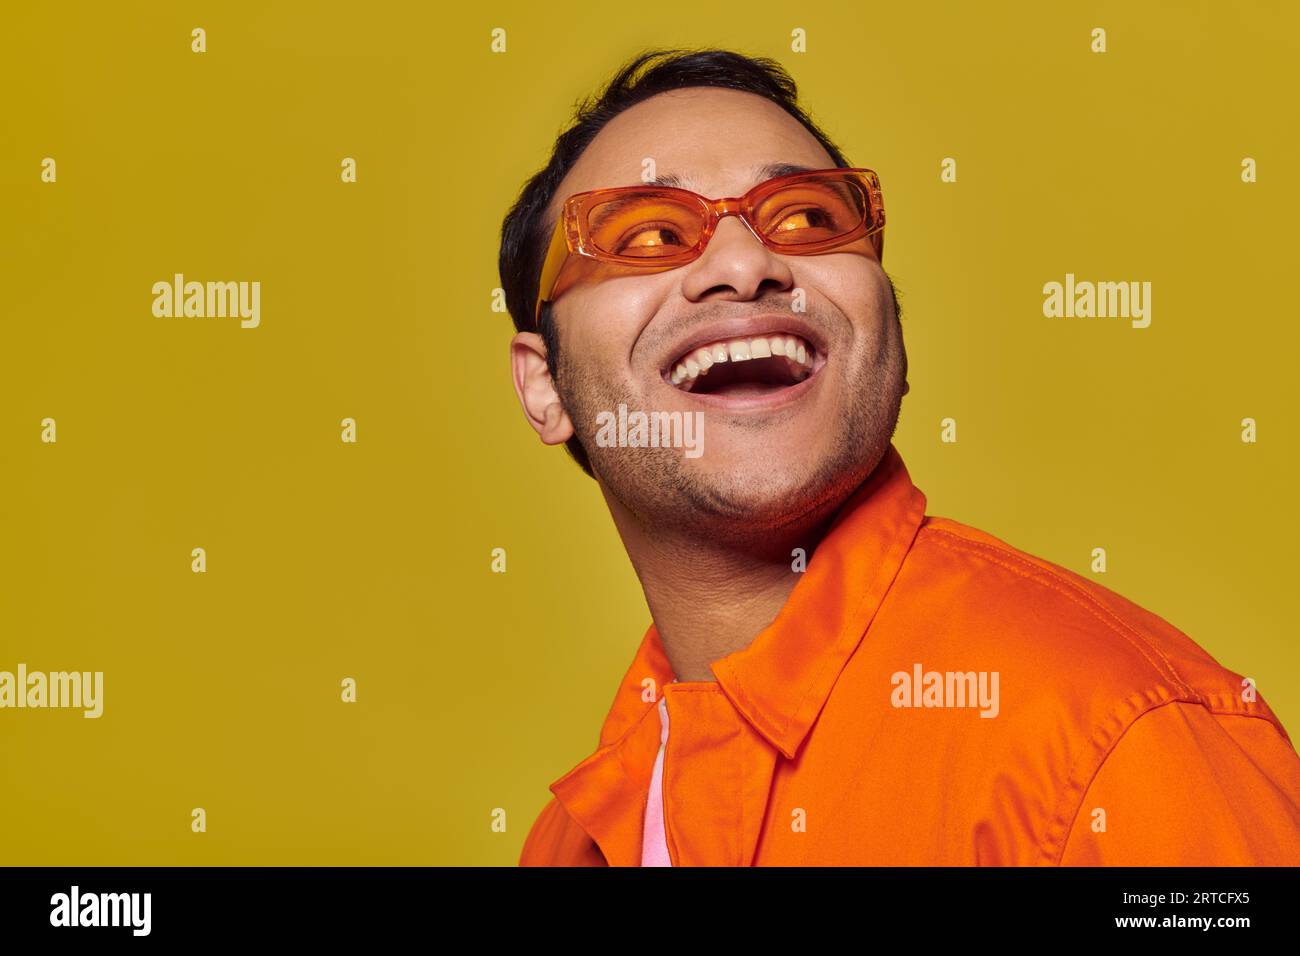 amazed indian man in orange sunglasses looking away and smiling on yellow background, side glance Stock Photo